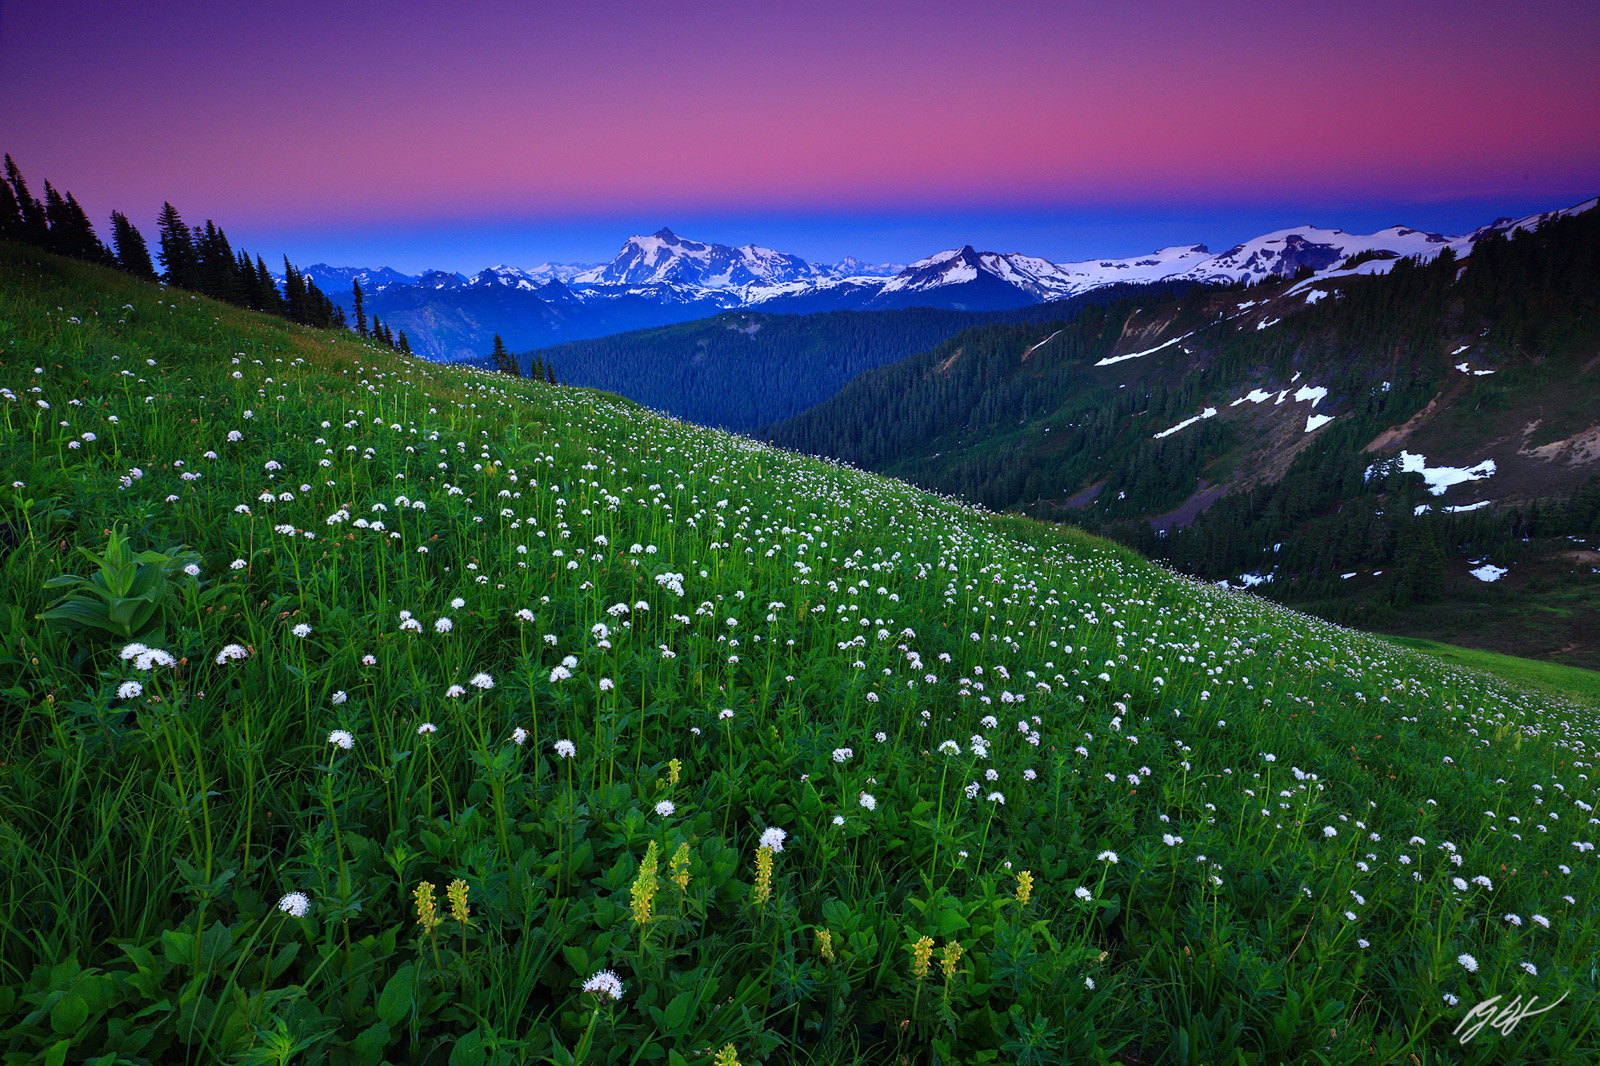 Sunset Alpenglow with wildflowers and Mt Shuksan from Skyline Divide in the Mt Baker Wilderness in Washington